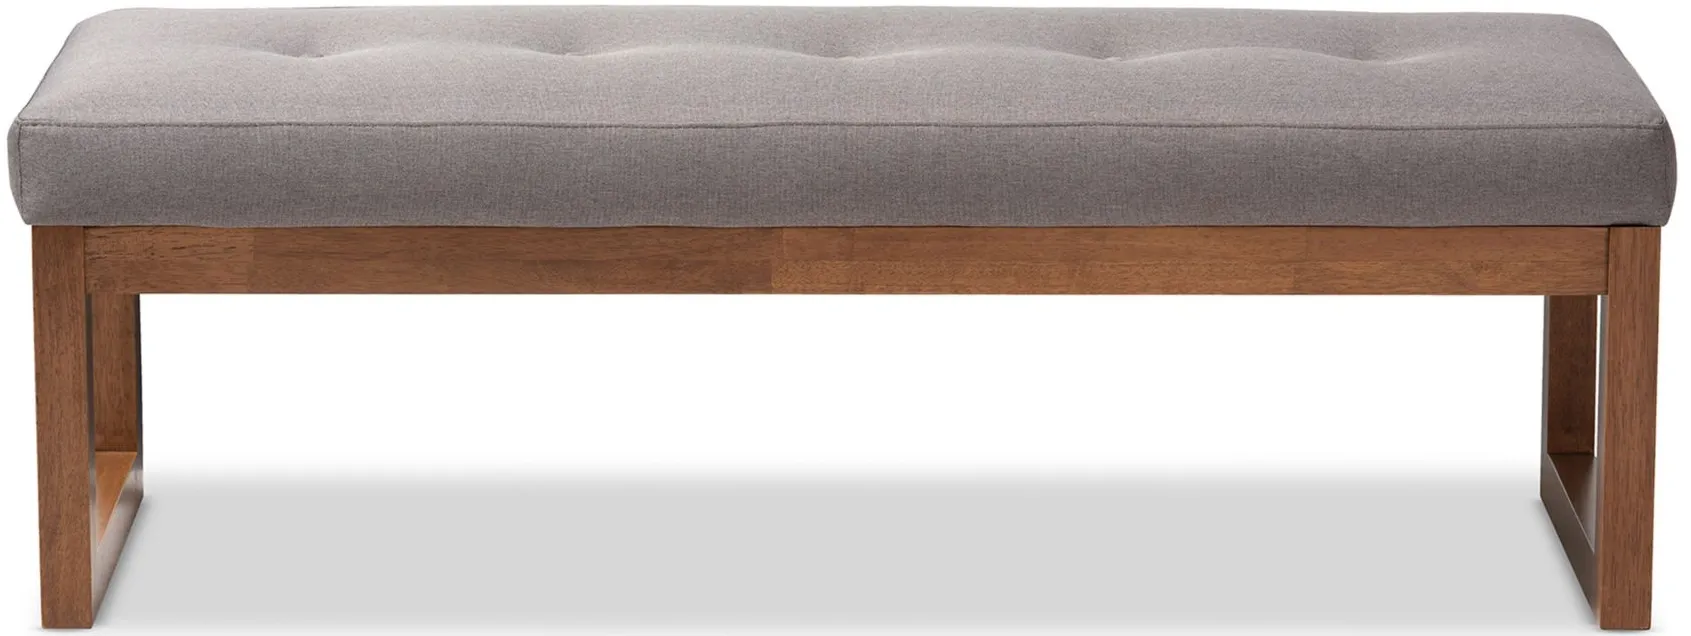 Caramay Fabric Upholstered Wood Bench in Gray by Wholesale Interiors